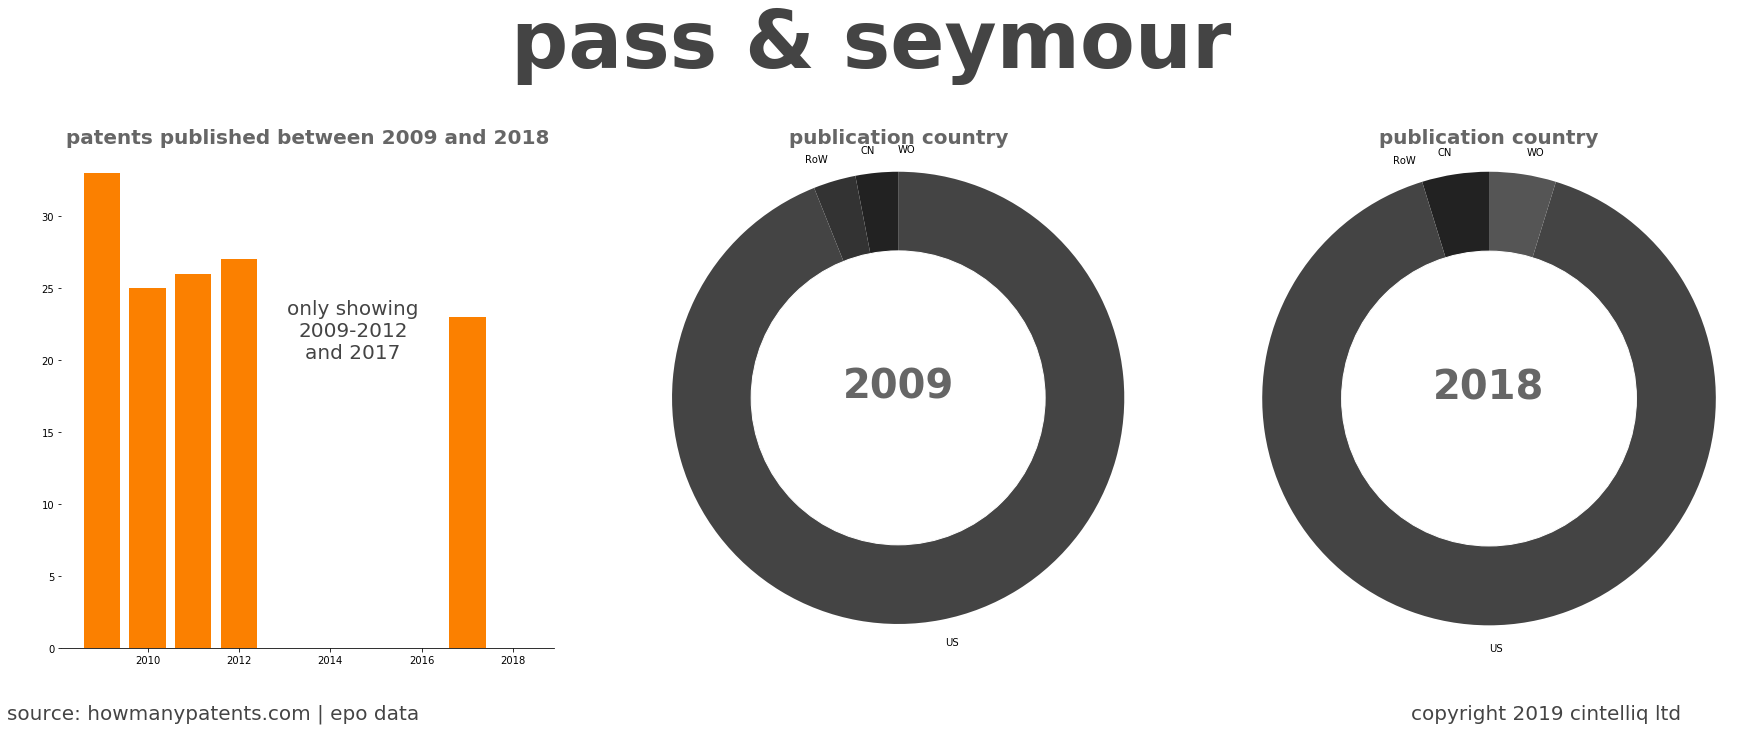 summary of patents for Pass & Seymour